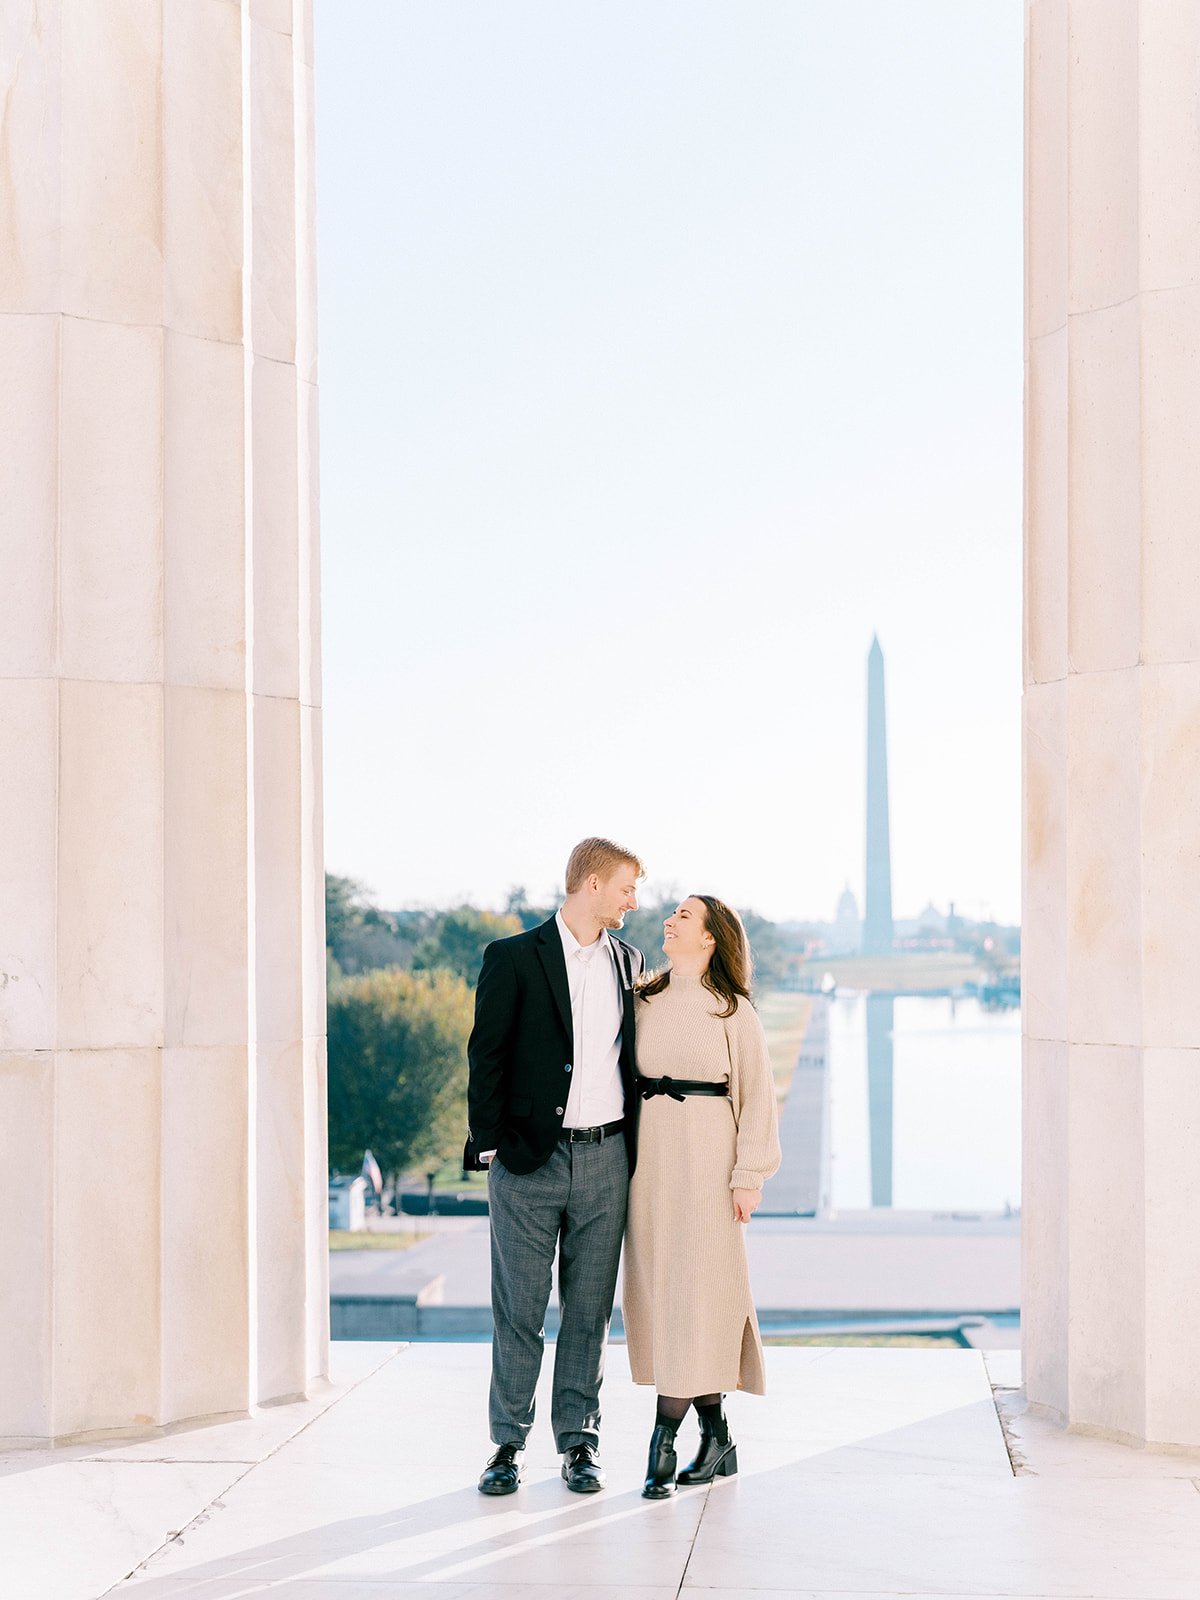 Washington DC Engagement Session Andrew & Rachel by Ica Images www.icaimages.com 120_websize.jpg